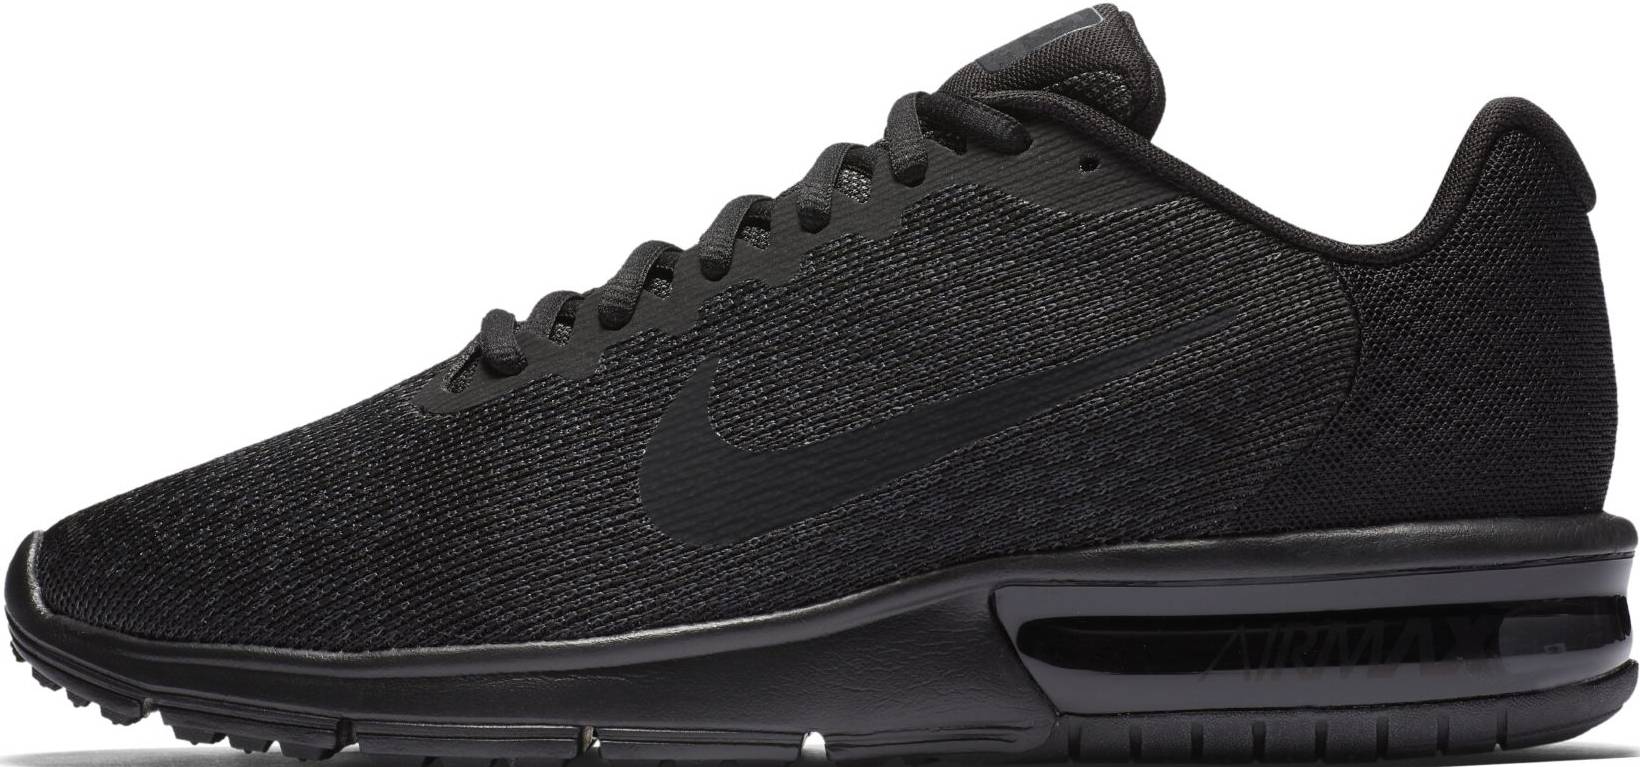 Nike Air Max Sequent 2 - Deals ($80), Facts, Reviews (2021 ...